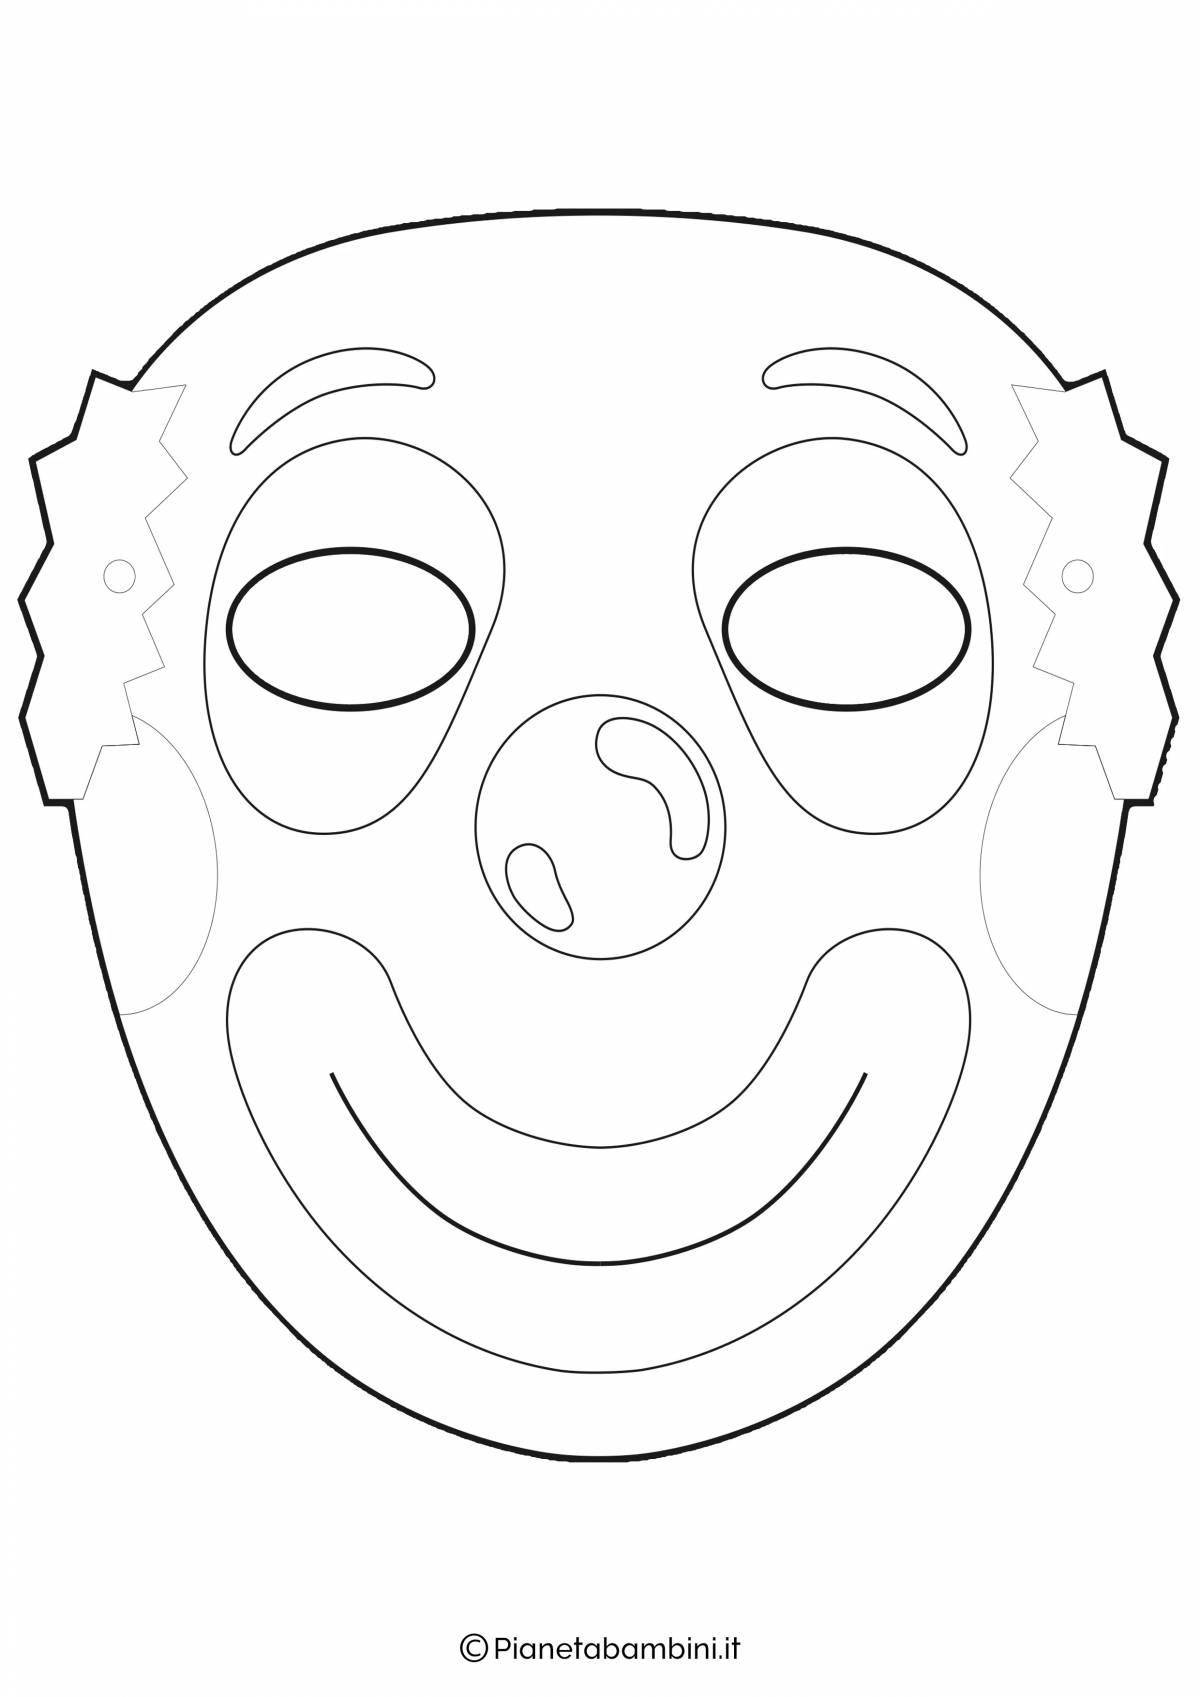 Glowing snowman mask coloring page